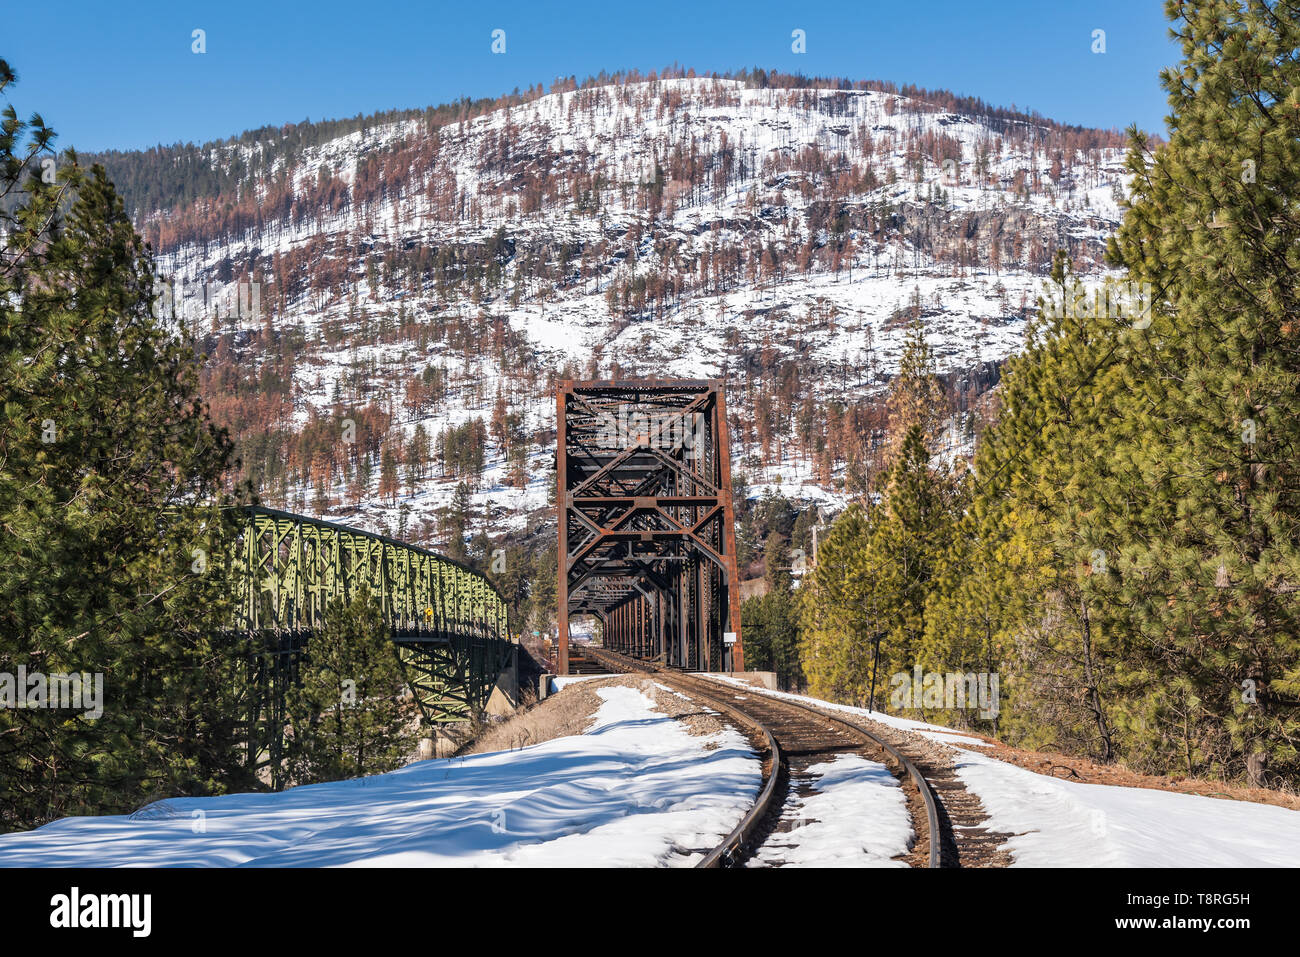 State Highway 20, US Highway 395 and the railroad cross Lake Roosevelt at Kettle Falls, Washington on Steel Truss Bridges in the early spring Stock Photo